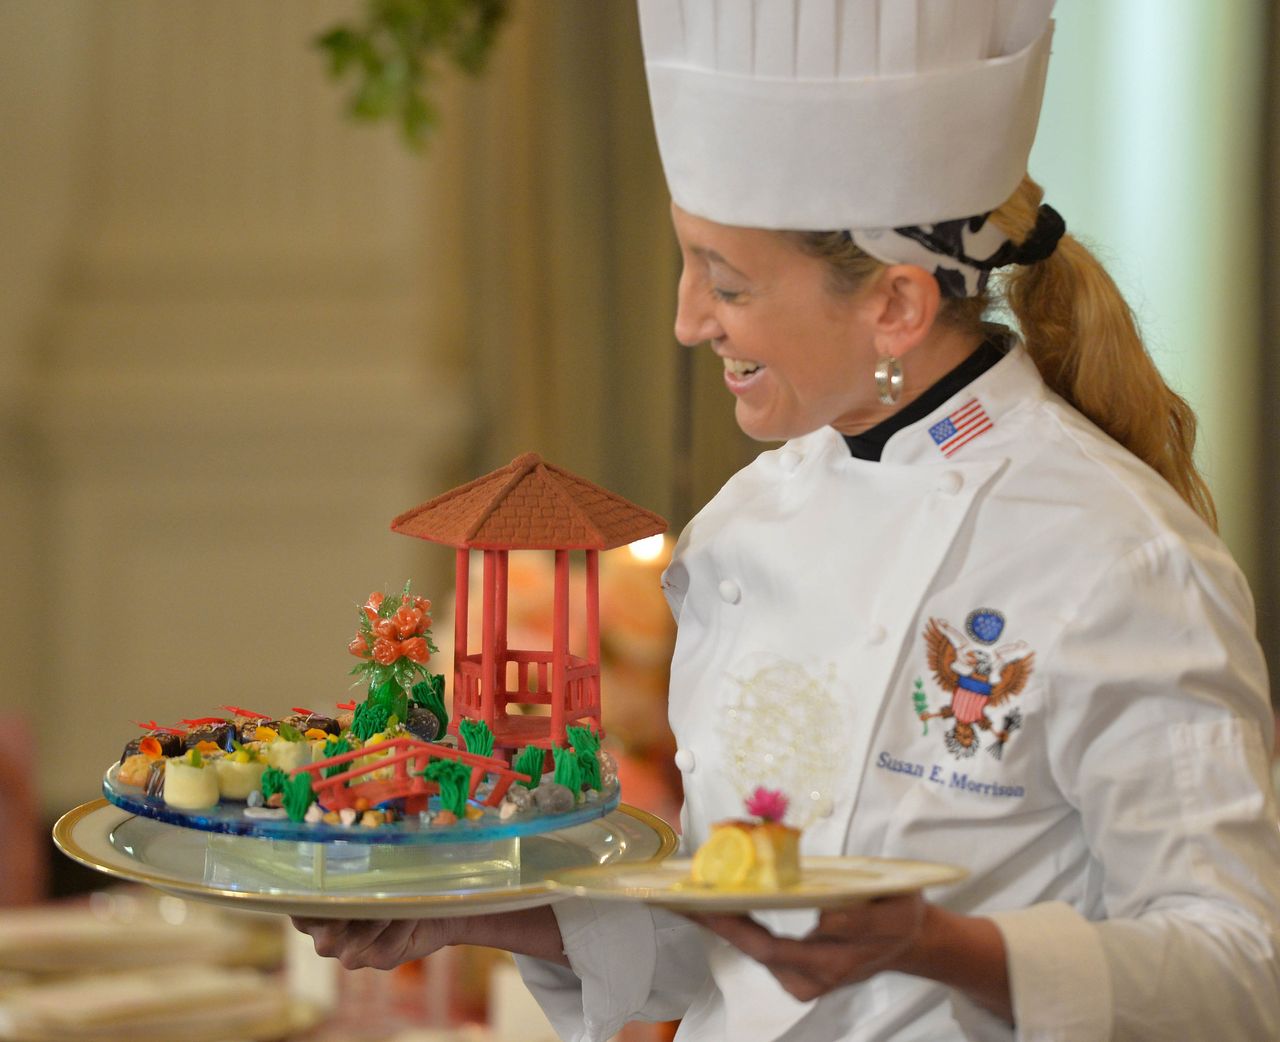 The pastry chef displays a dessert featuring a Chinese-style chocolate pavilion and bridge.